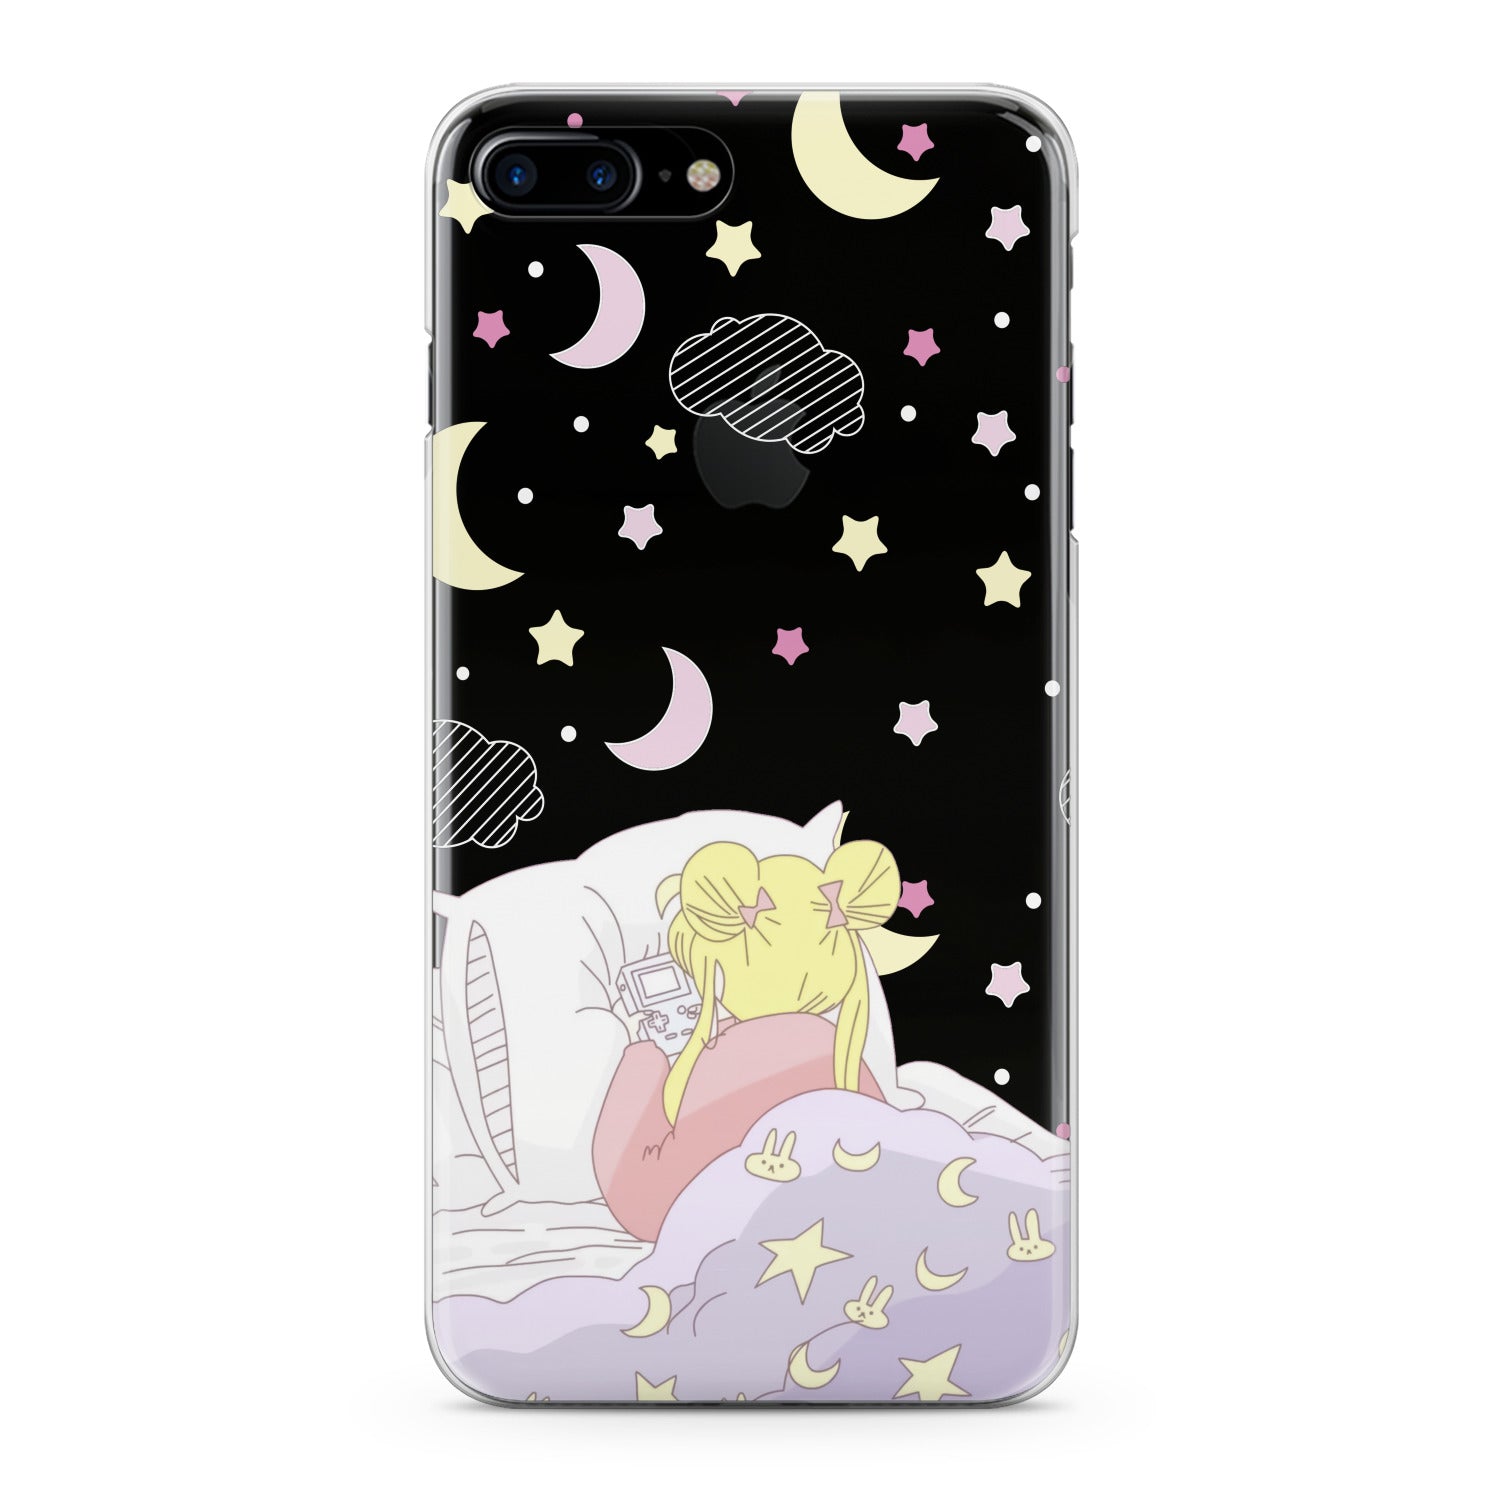 Lex Altern Dreamy Sailor Moon Phone Case for your iPhone & Android phone.